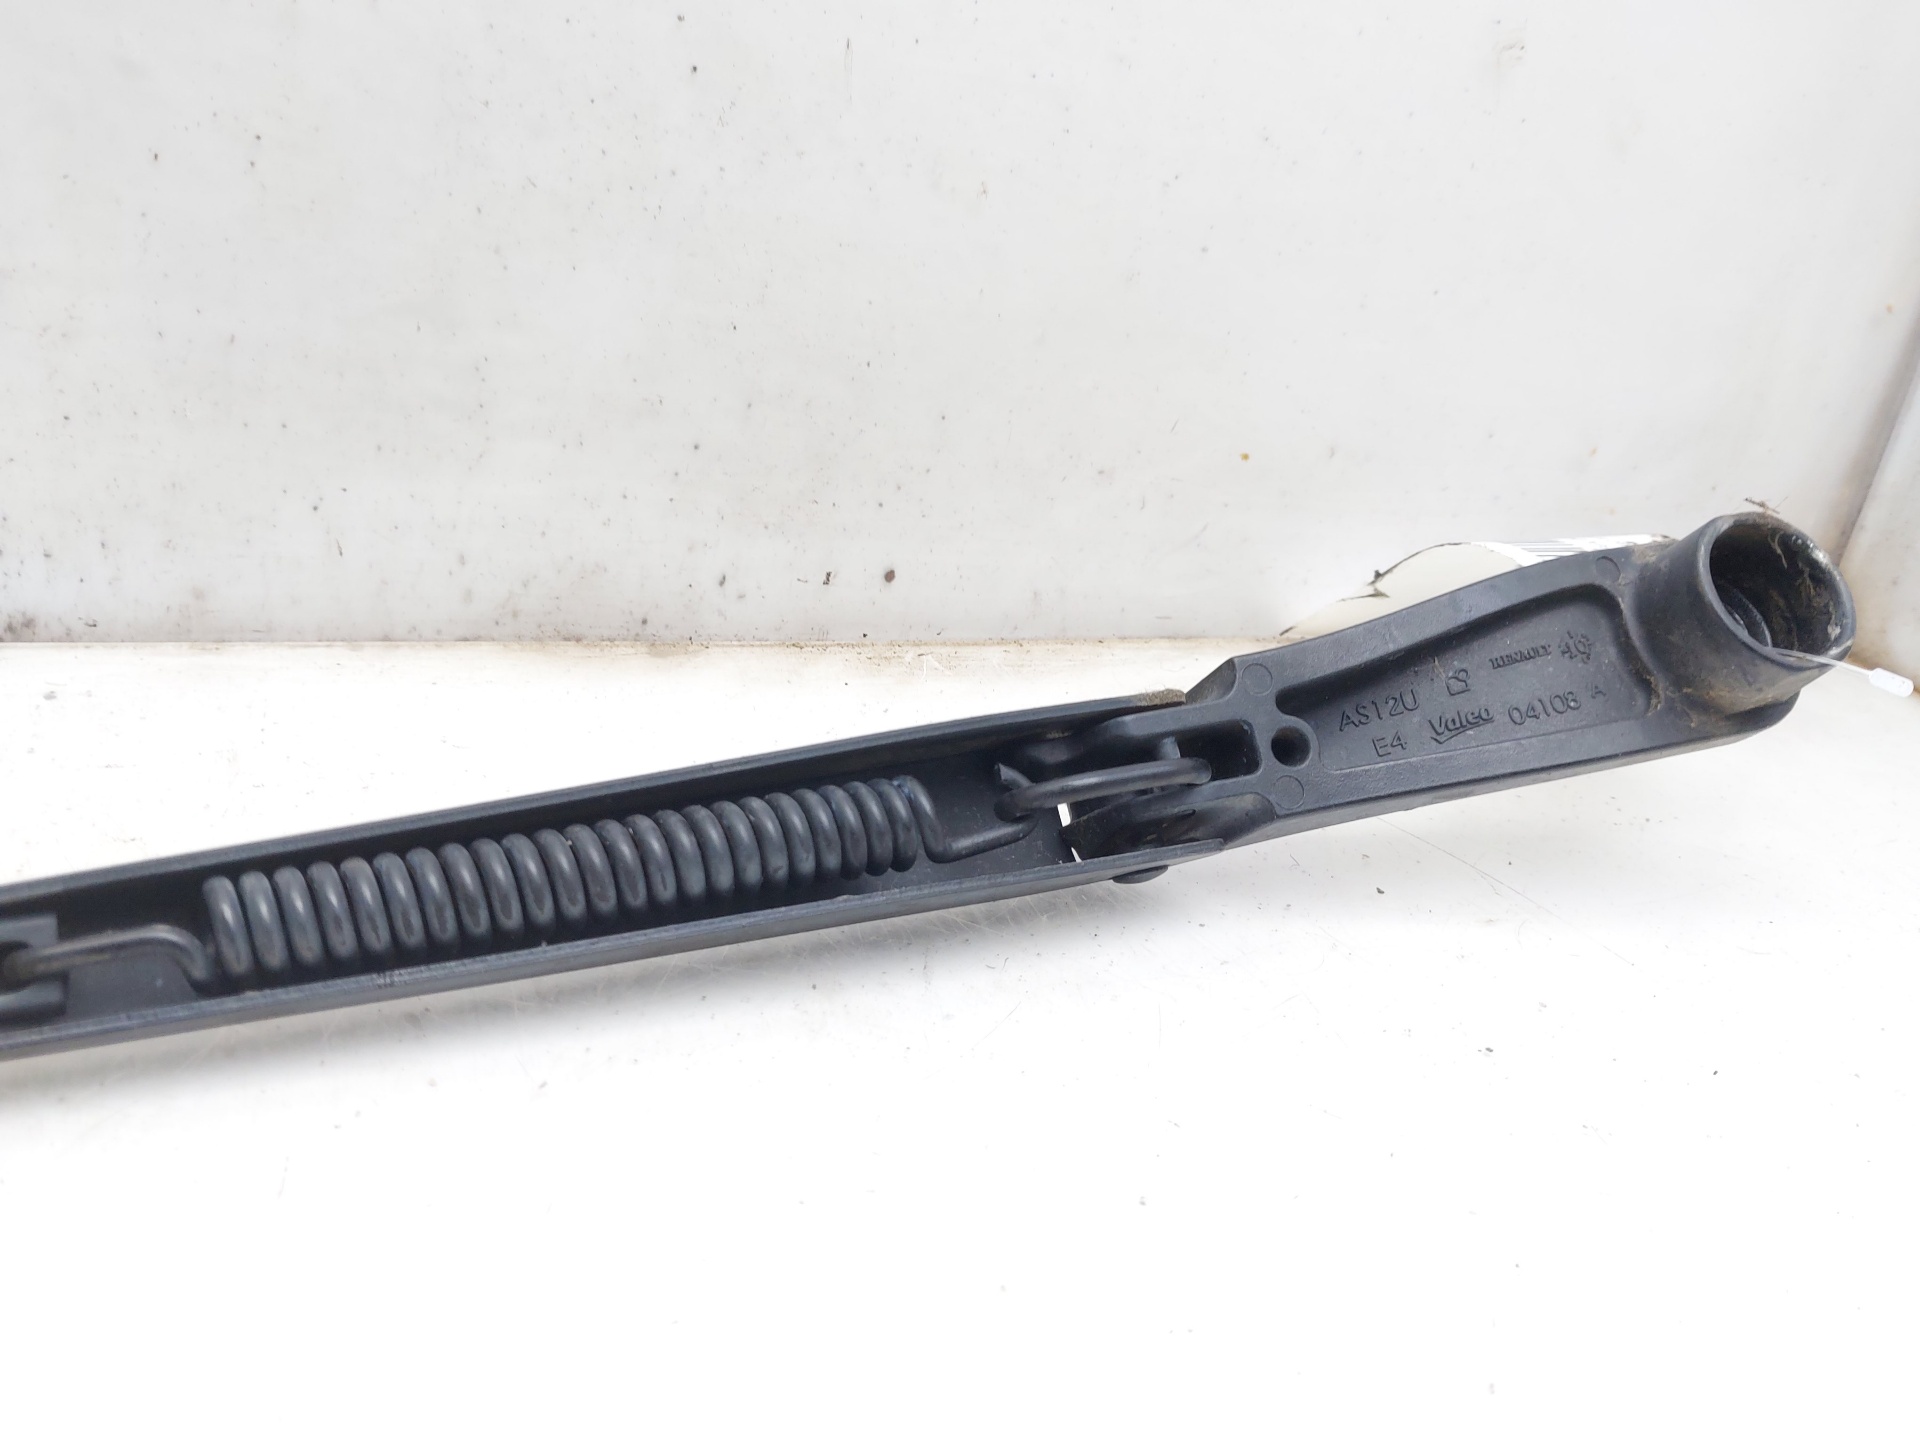 RENAULT Scenic 3 generation (2009-2015) Front Wiper Arms 288810003R 22574477